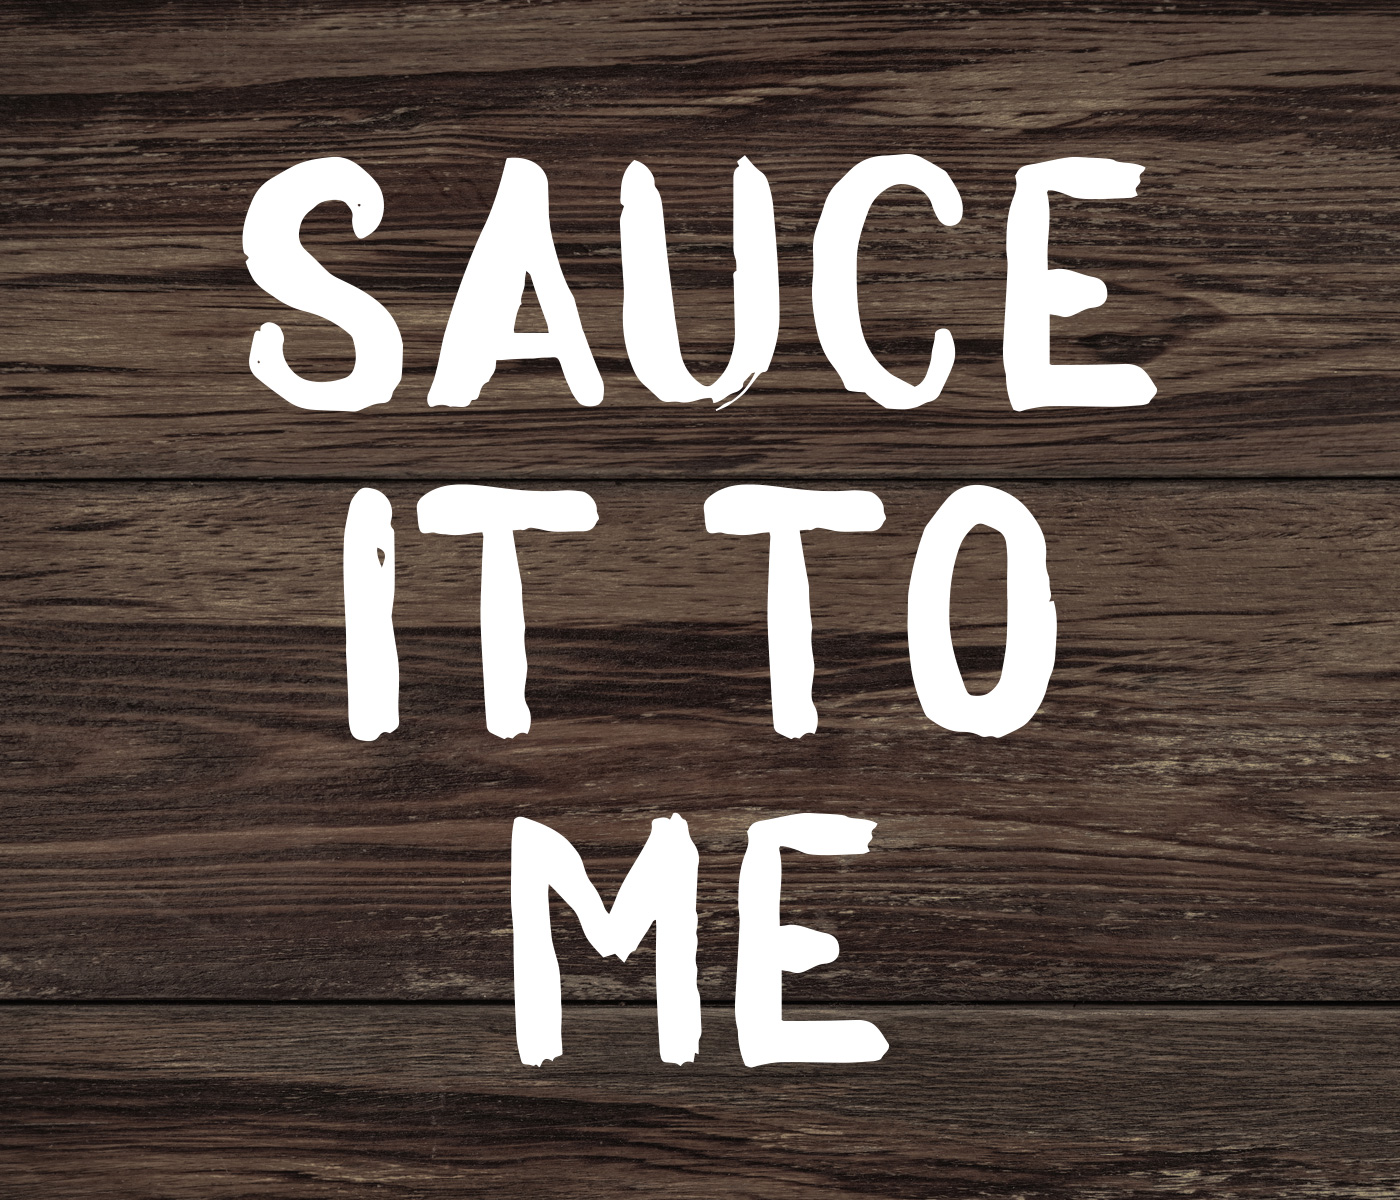 Sauce it to me